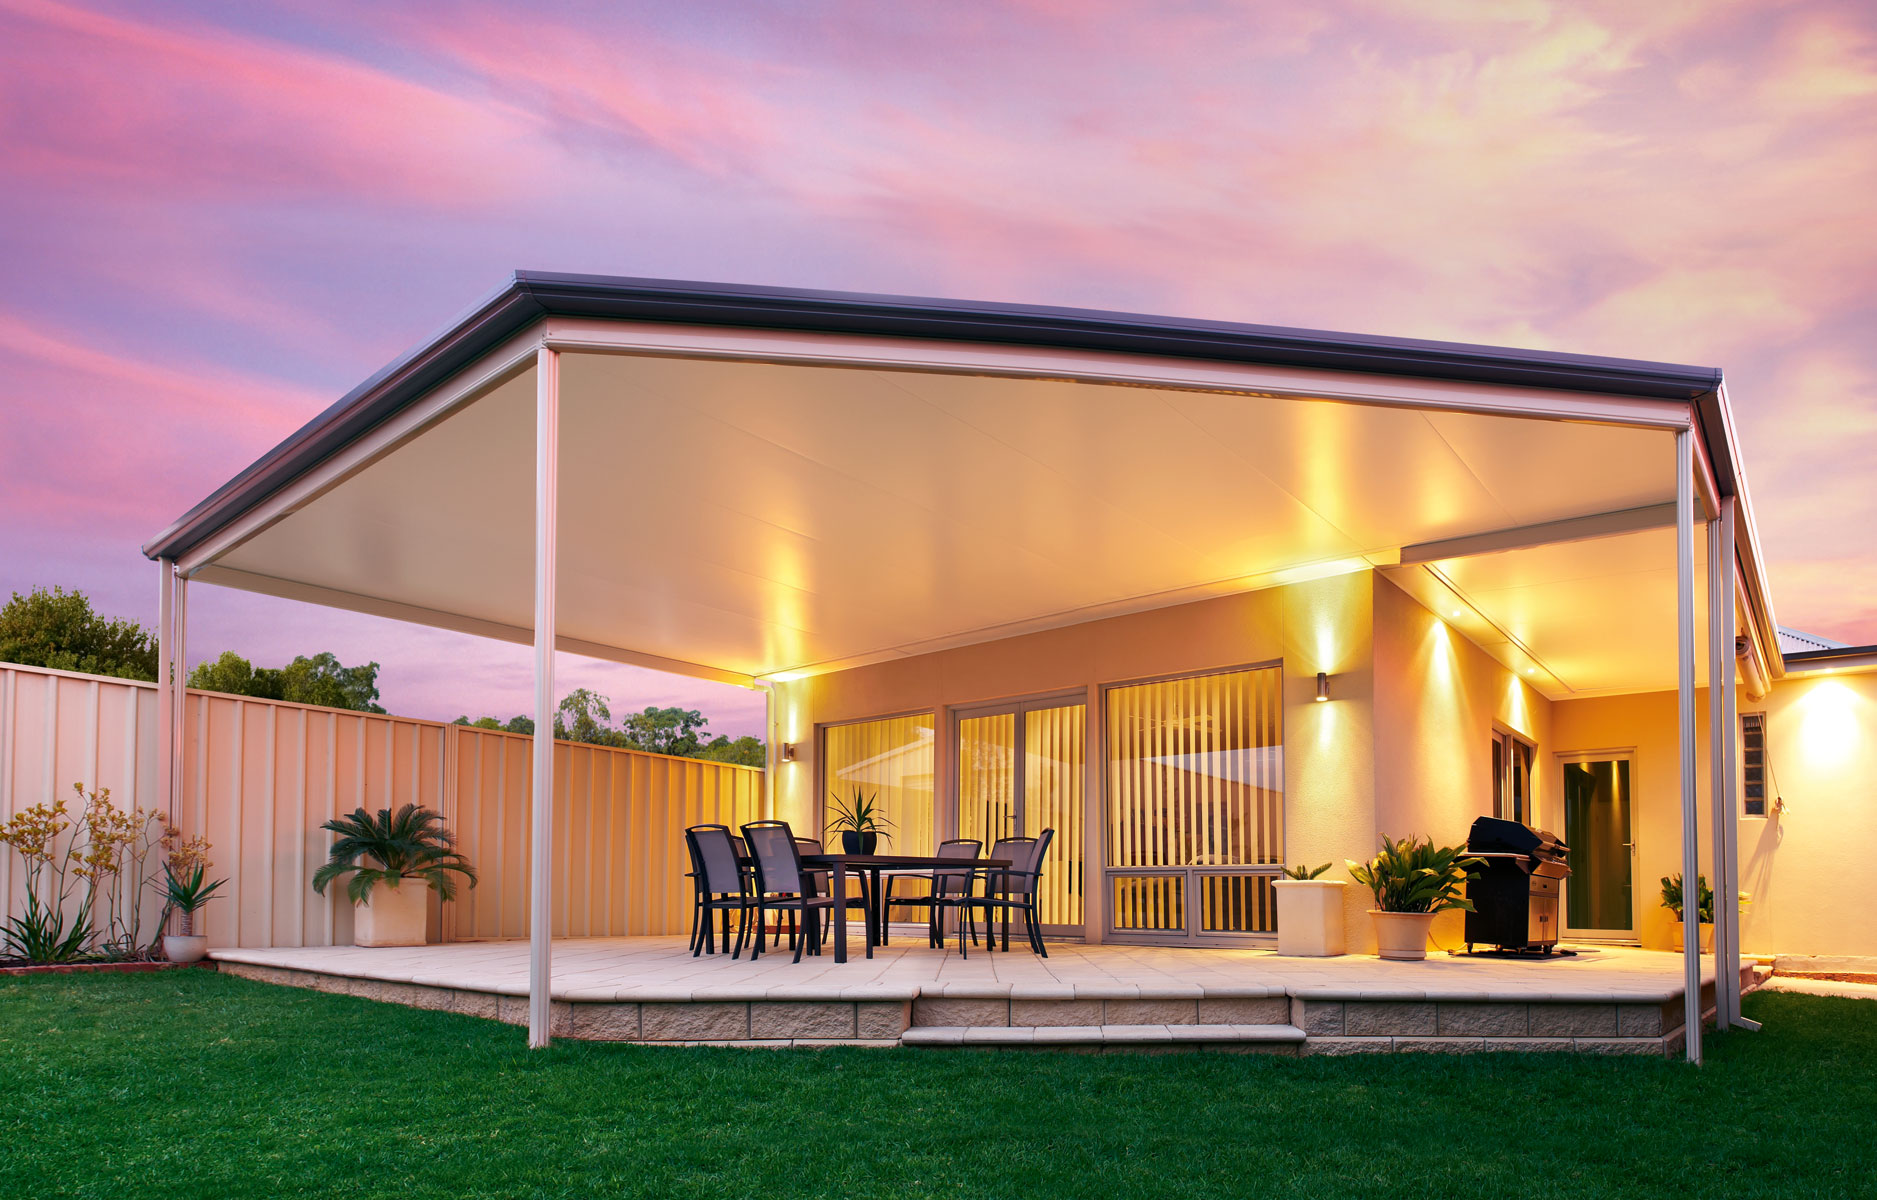 GW Patios: Crafting Outdoor Comfort with Patios, Verandahs, Carports, and Cooldek in the Outback